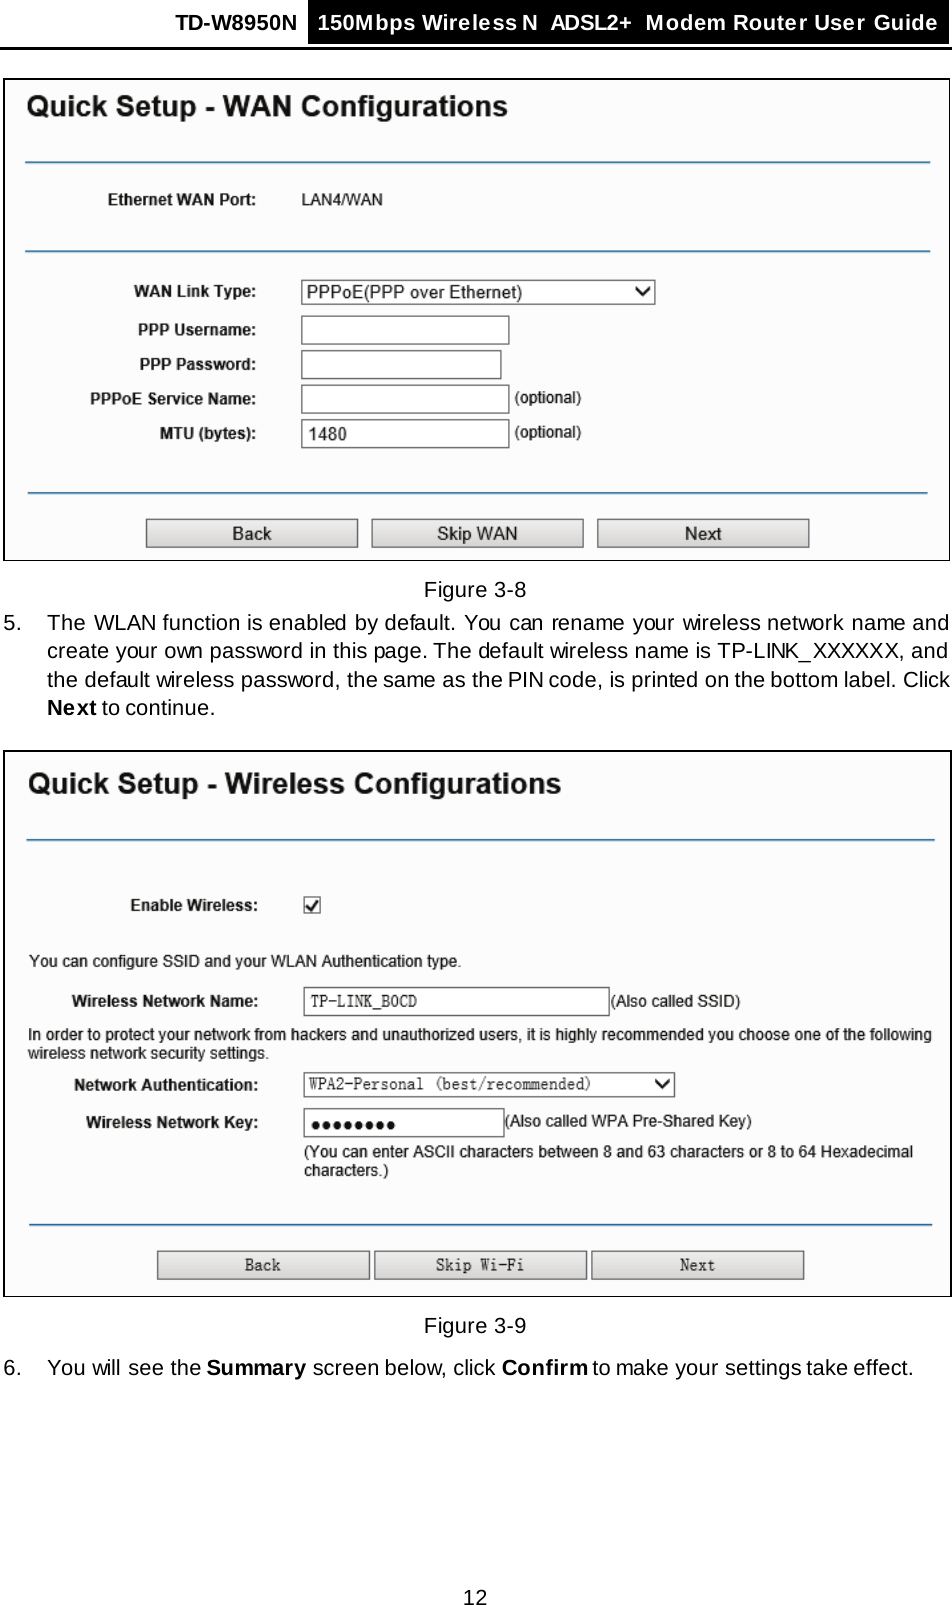 TD-W8950N 150Mbps Wireless N  ADSL2+ Modem Router User Guide  12  Figure 3-8 5. The WLAN function is enabled by default. You can rename your wireless network name and create your own password in this page. The default wireless name is TP-LINK_XXXXXX, and the default wireless password, the same as the PIN code, is printed on the bottom label. Click Next to continue.    Figure 3-9 6. You will see the Summary screen below, click Confirm to make your settings take effect. 